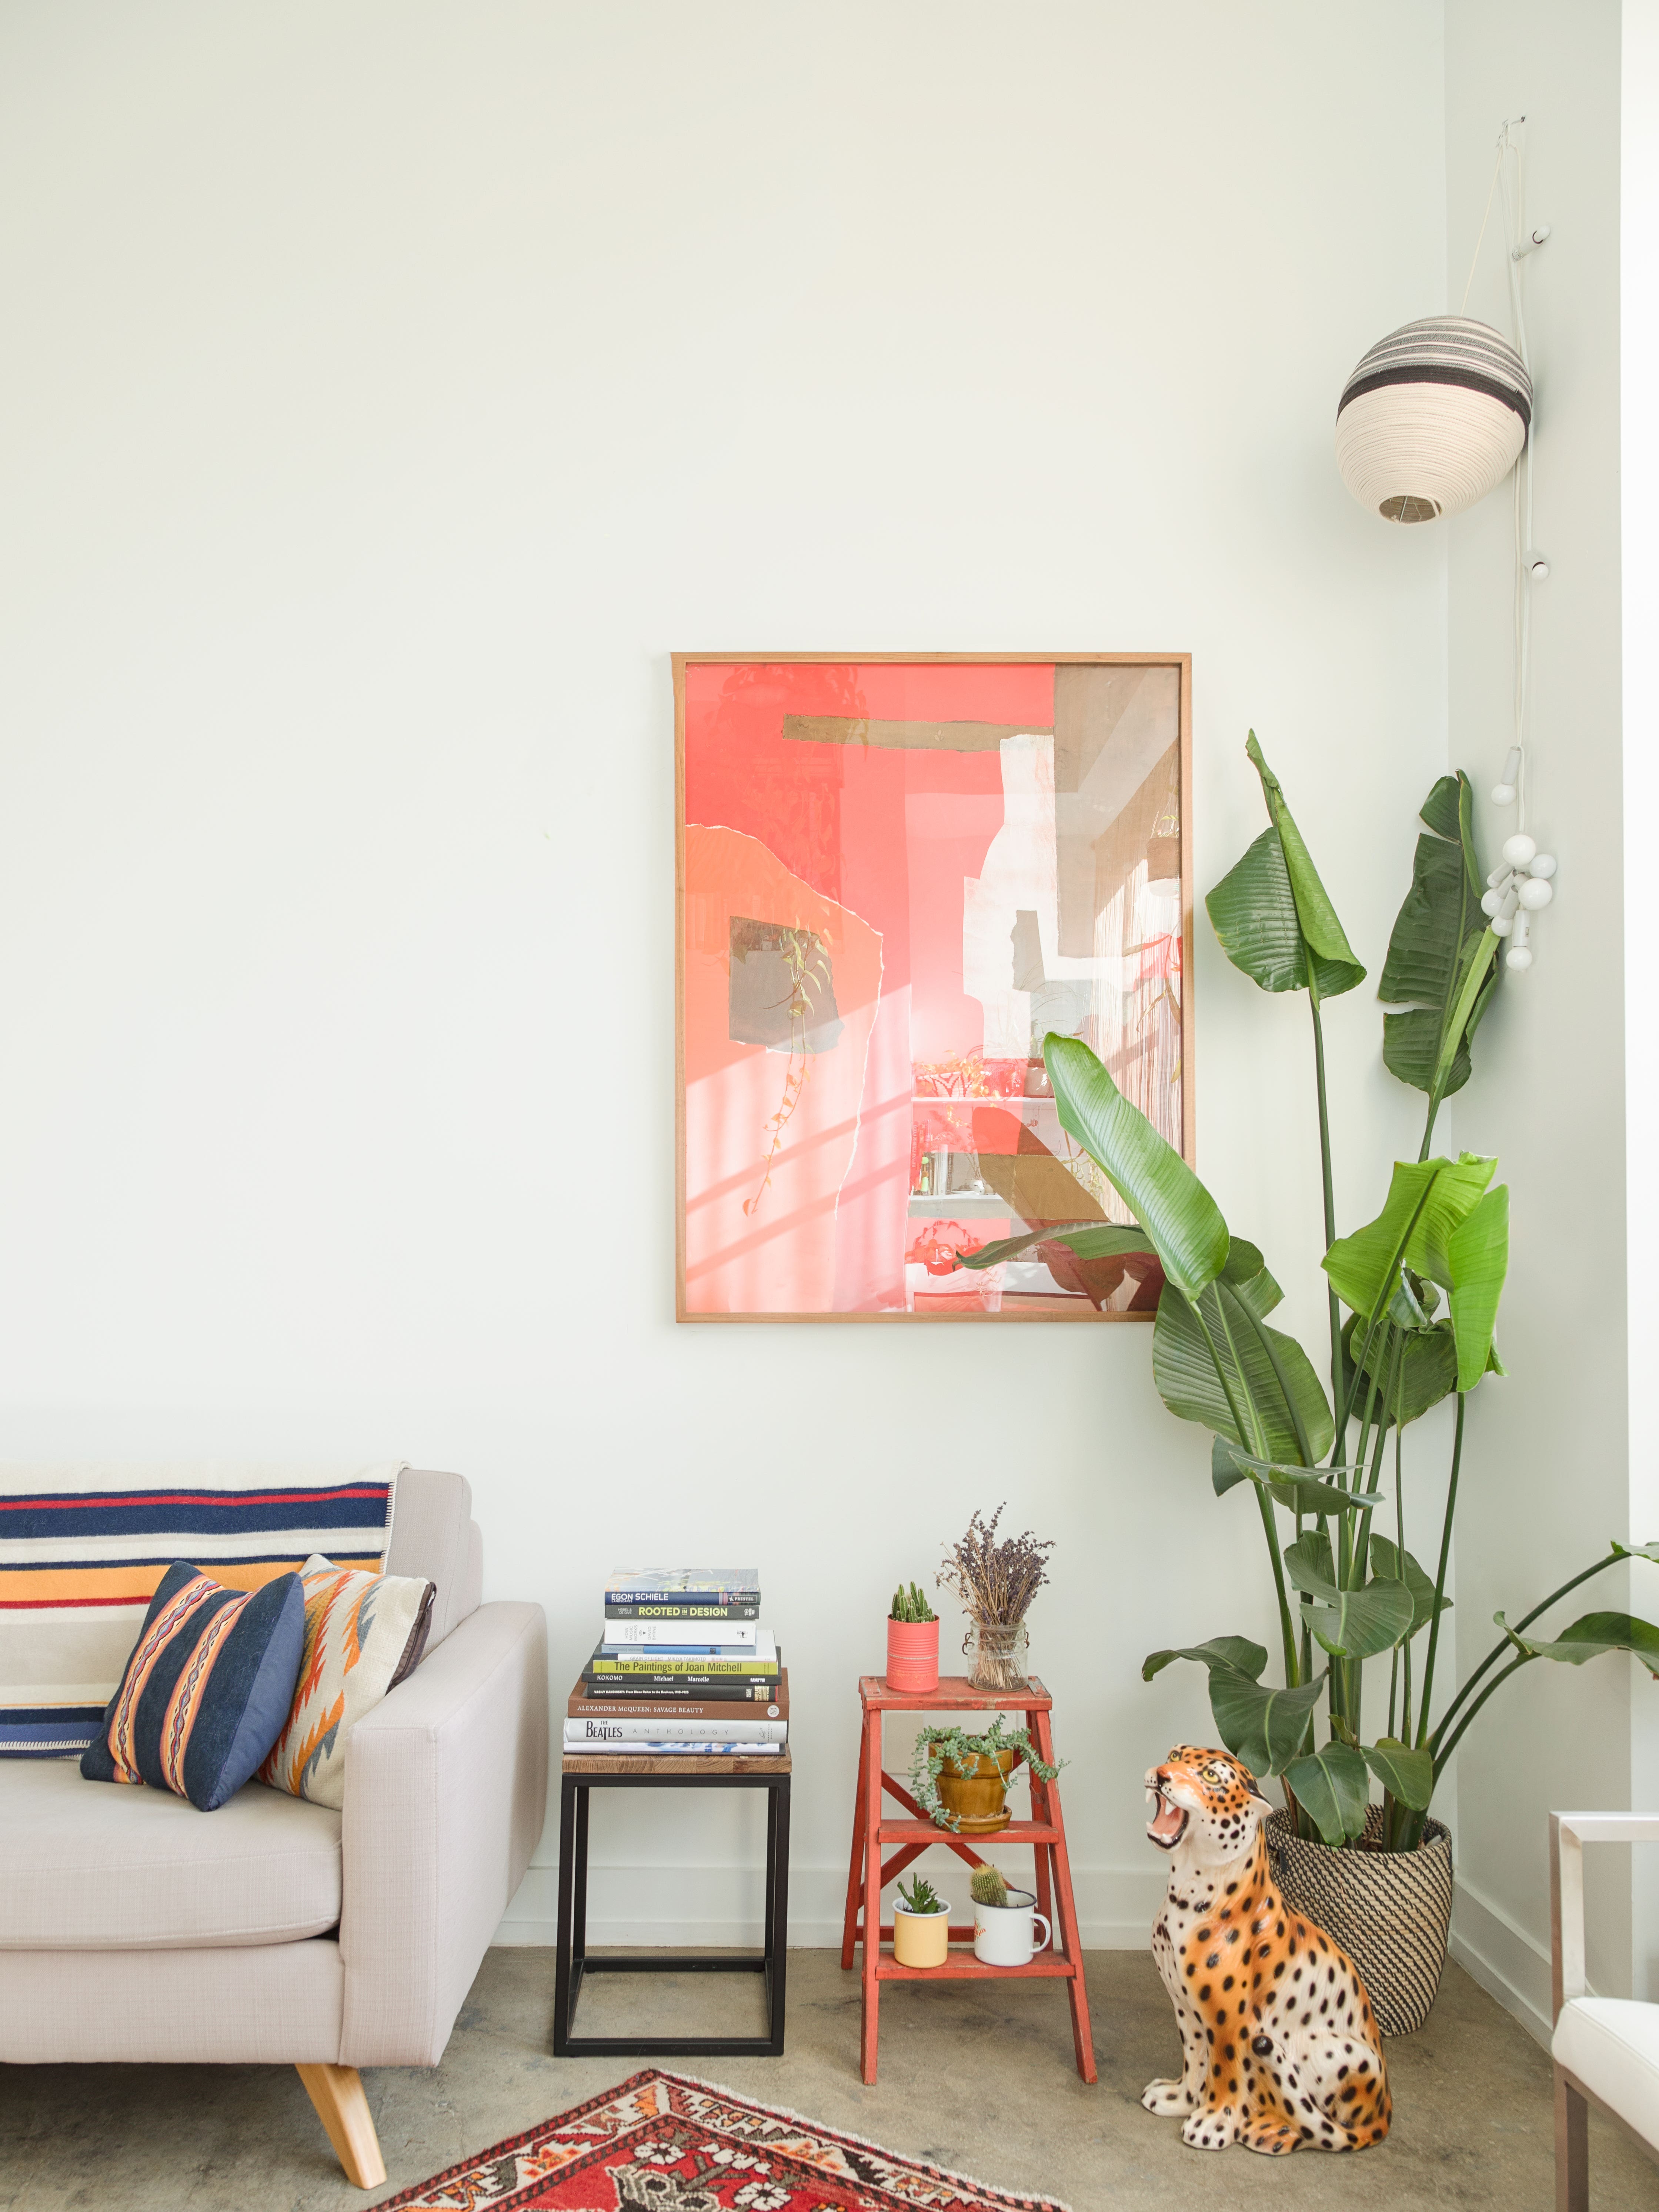 Etsy Predicted 2019’s Biggest Decor Trends—These 3 Are Worth the Investment